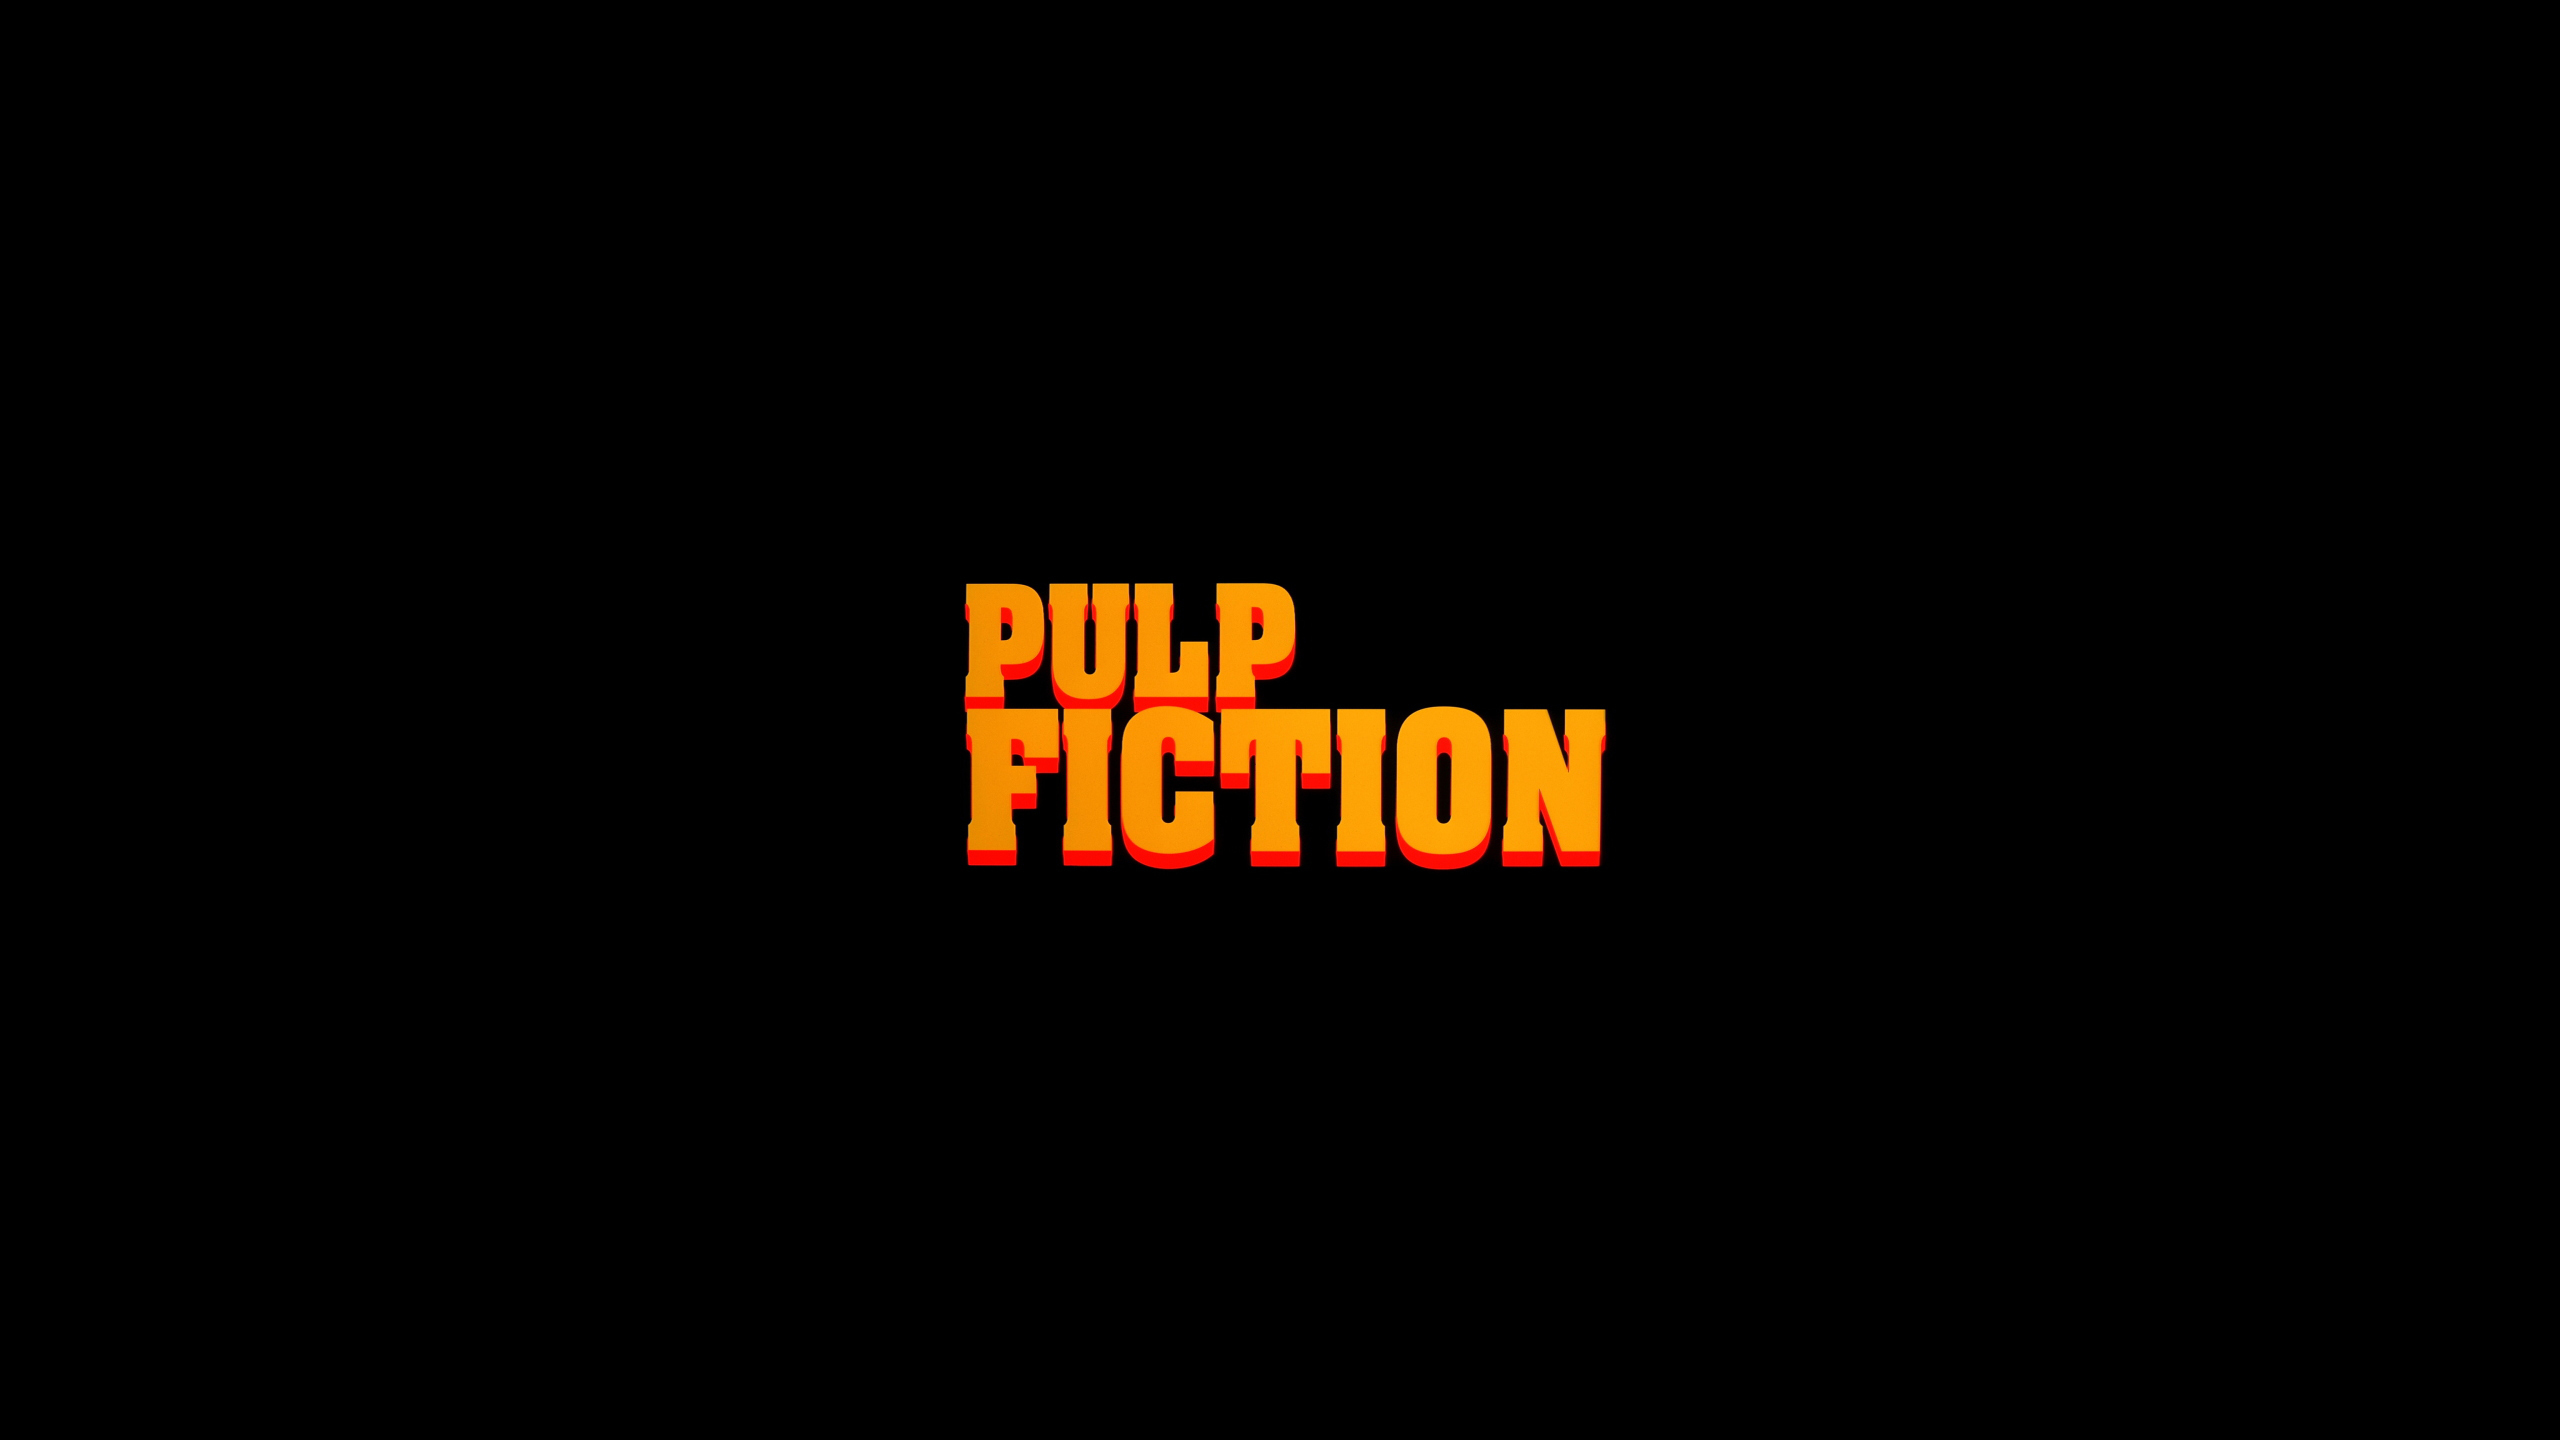 All Pulp Fiction wallpapers.